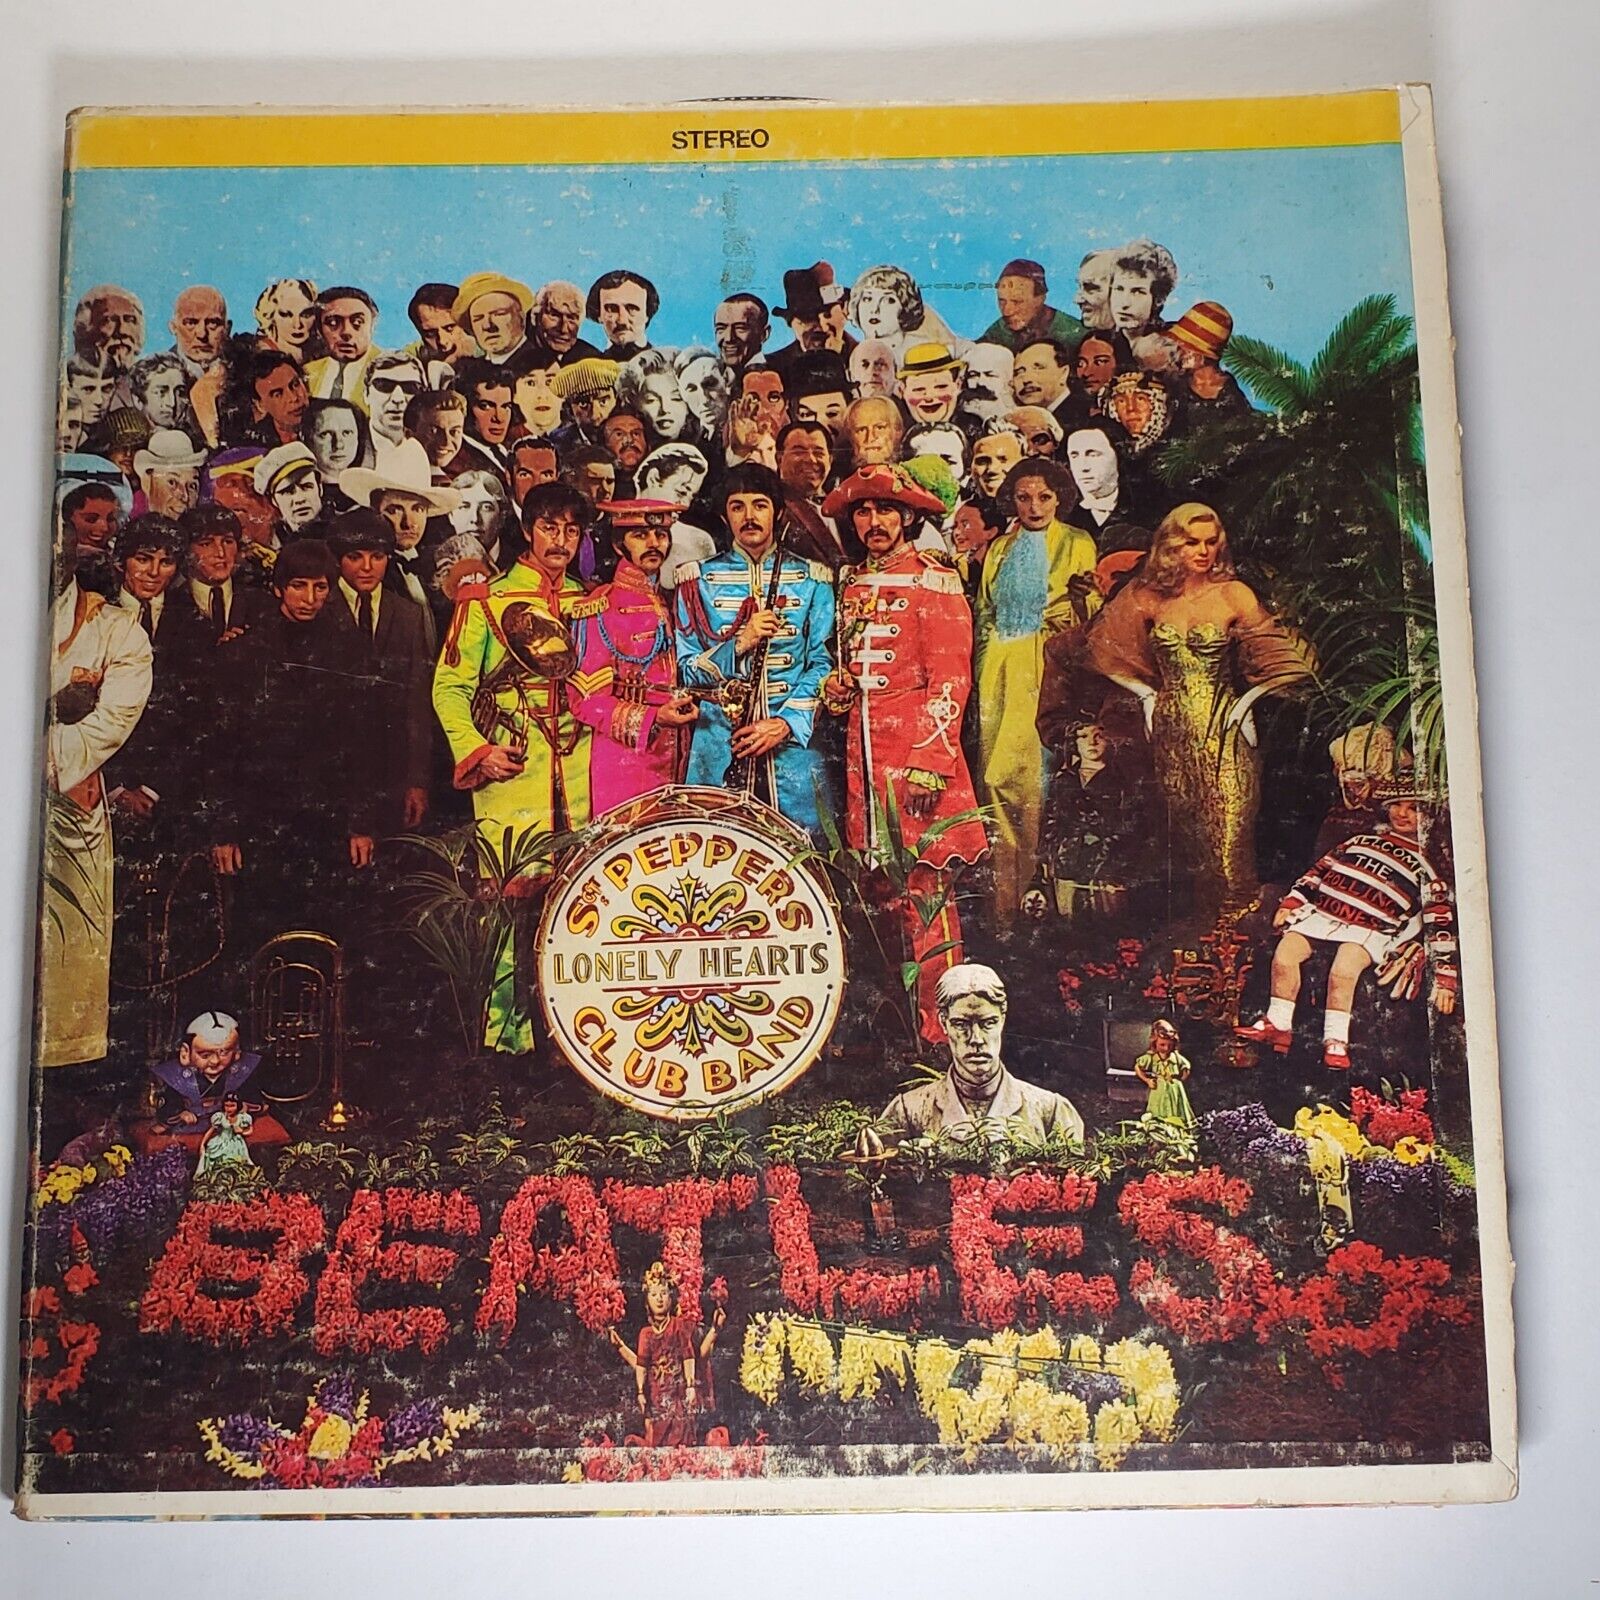 The Beatles - Sgt Pepper's Lonely Hearts Club Band Vinyl 1968 SMAS 2653 Gatefold